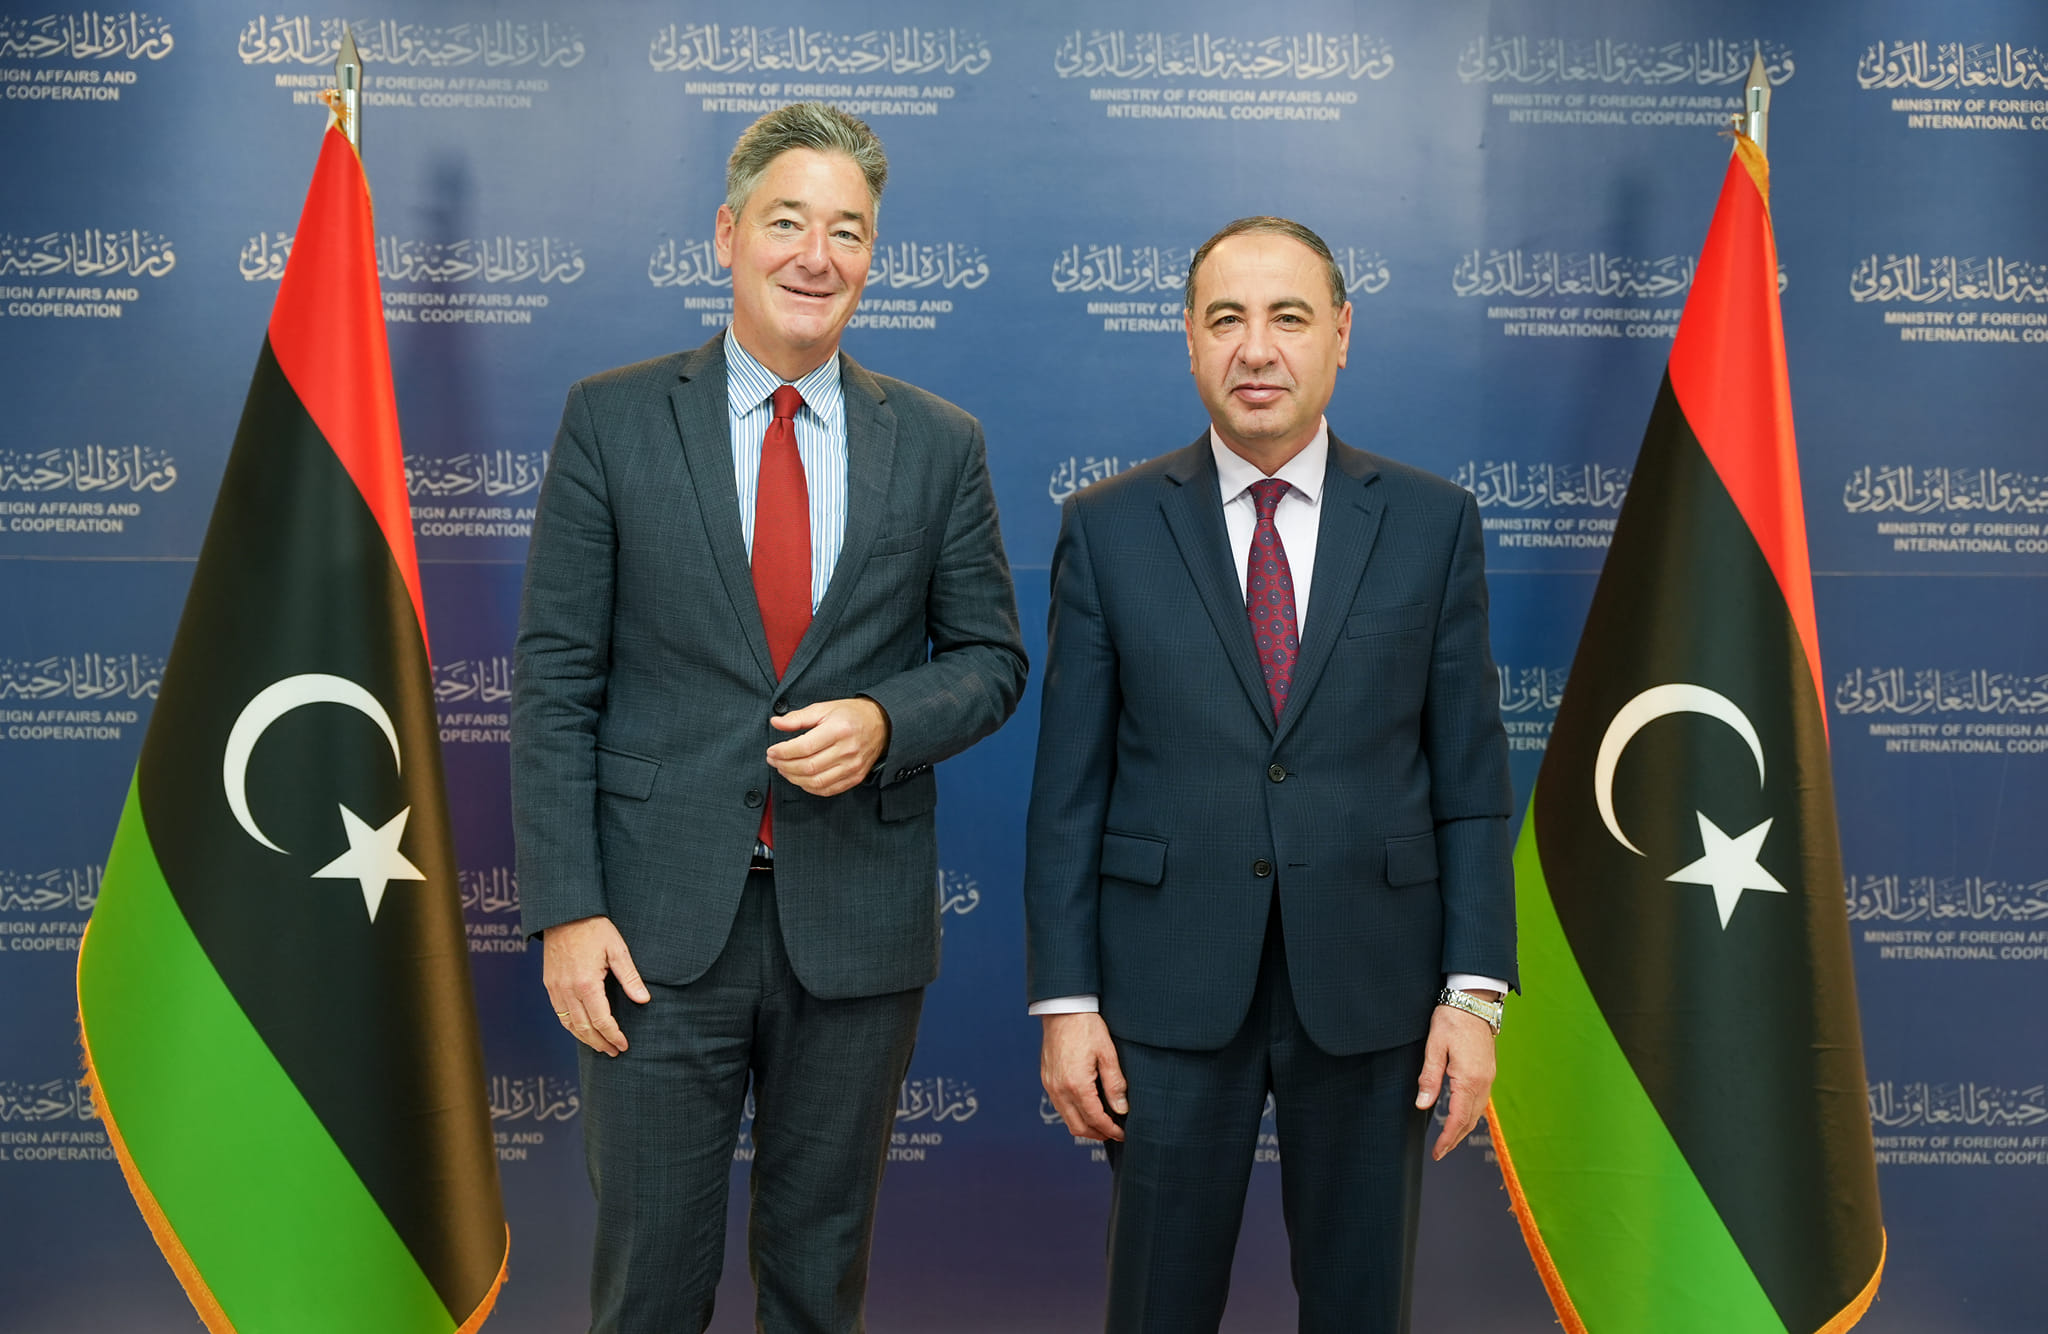 A-Baour and Ohnmacht discuss the latest developments in the political and security situation in Libya.